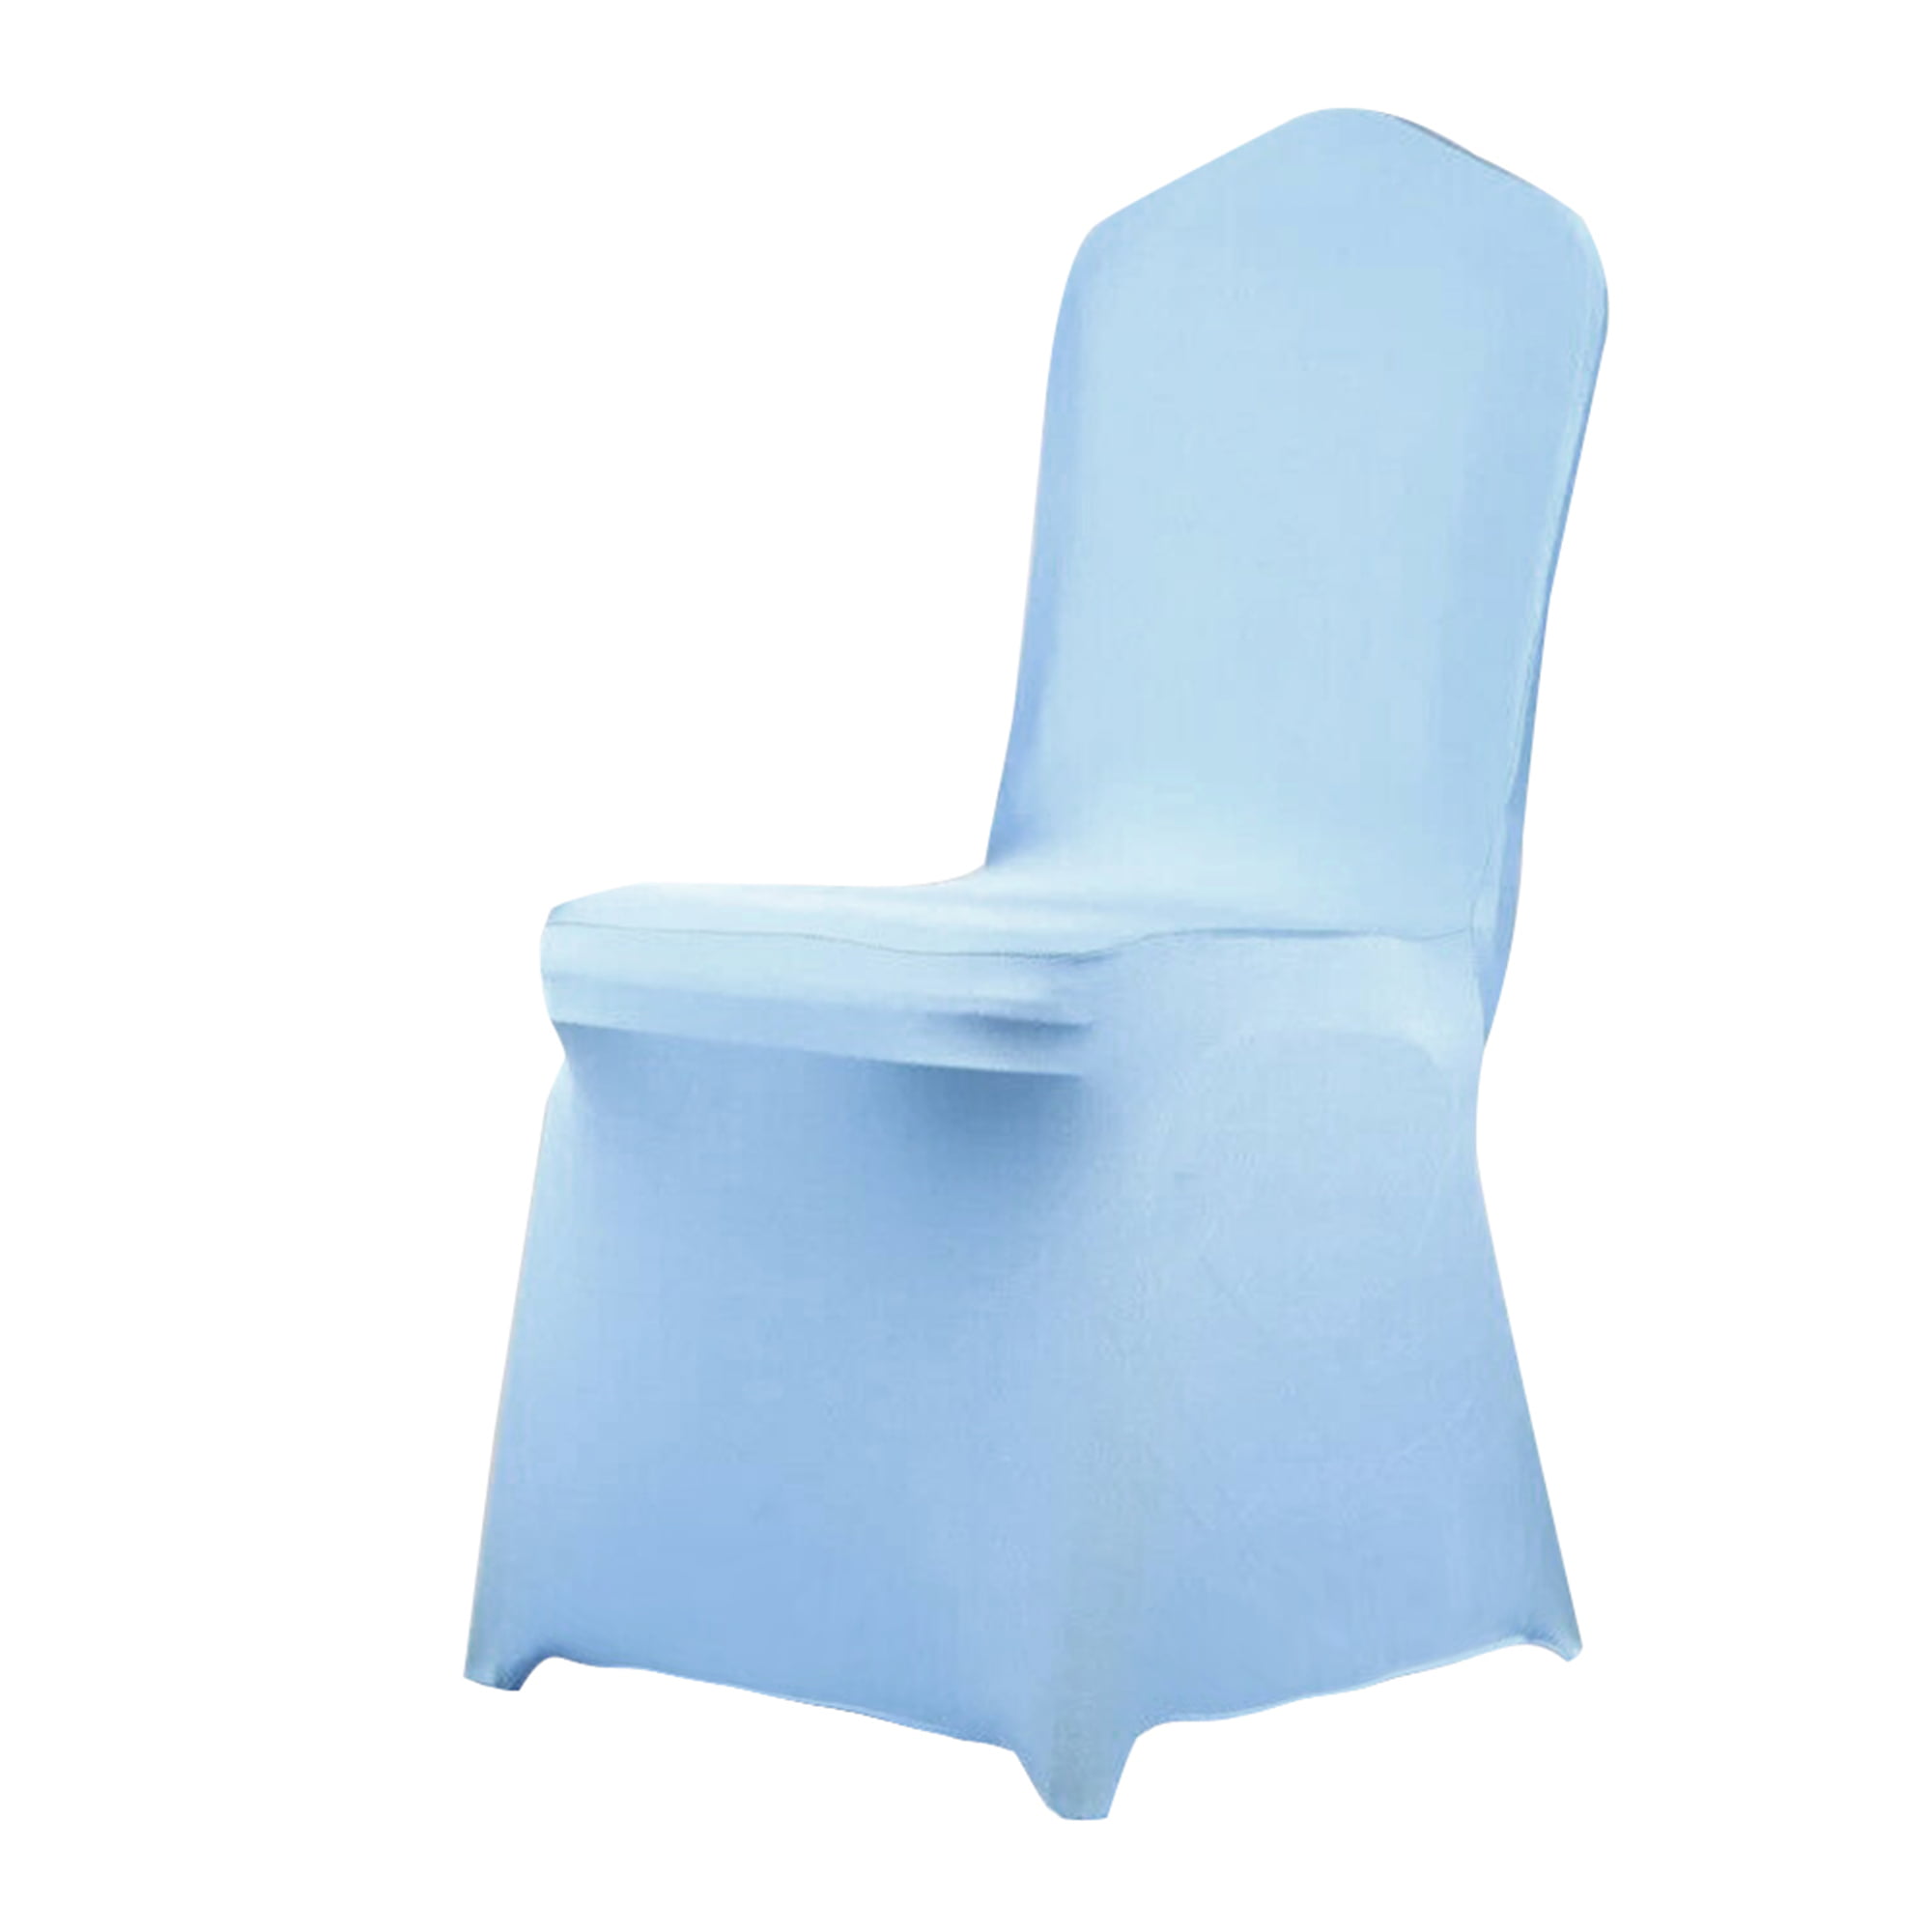 All Occasions Chair Covers for Wedding Banquet Anniversary Party Decorations 